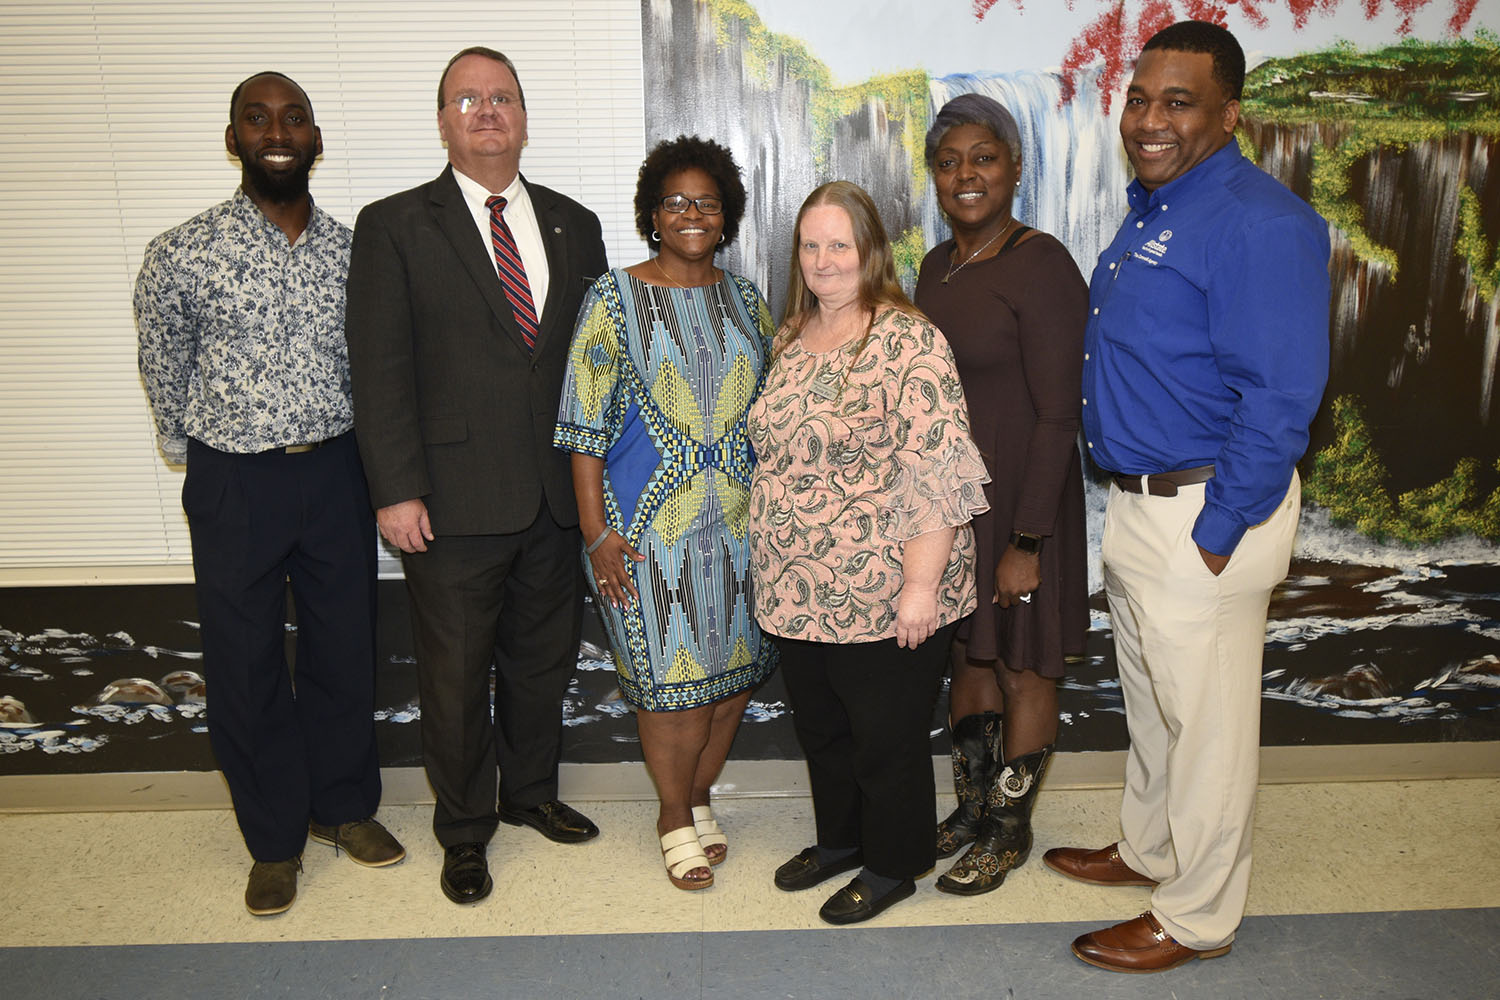 (From left) Randy Paschal, director of Paschal Memorial Funeral Home; Harold Reece, director of Reece Funeral Home and Twiggs County Coronor; Patricia Bass of United Healthcare; Ponda Ball of Middle Georgia Community Action Agency; Terralon Chaney, Fort Valley State University Extension agent for Twiggs County and Travis Carswell of Allstate Insurance recently made presentations during the Let’s Talk Insurance Seminar in Jeffersonville.